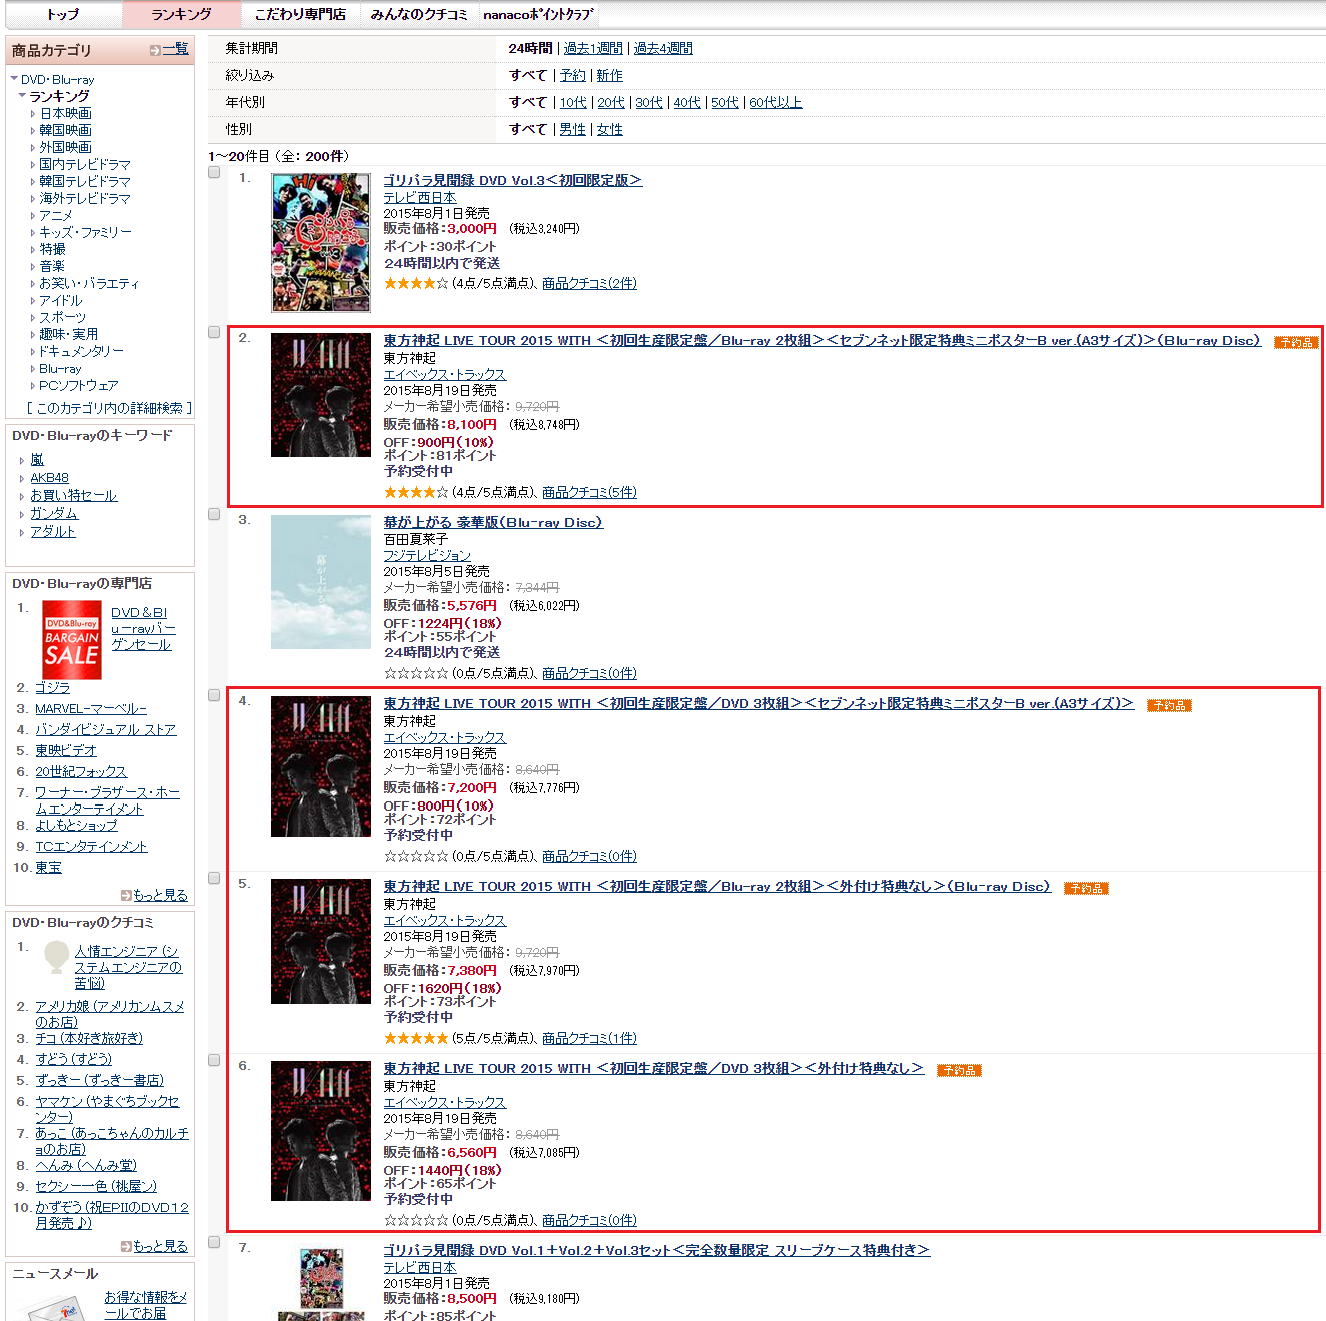 Info Tohoshinki Tvxq Releases Are Topping 7net Shopping Real Time Ranking For Different Categories Tvxq Express